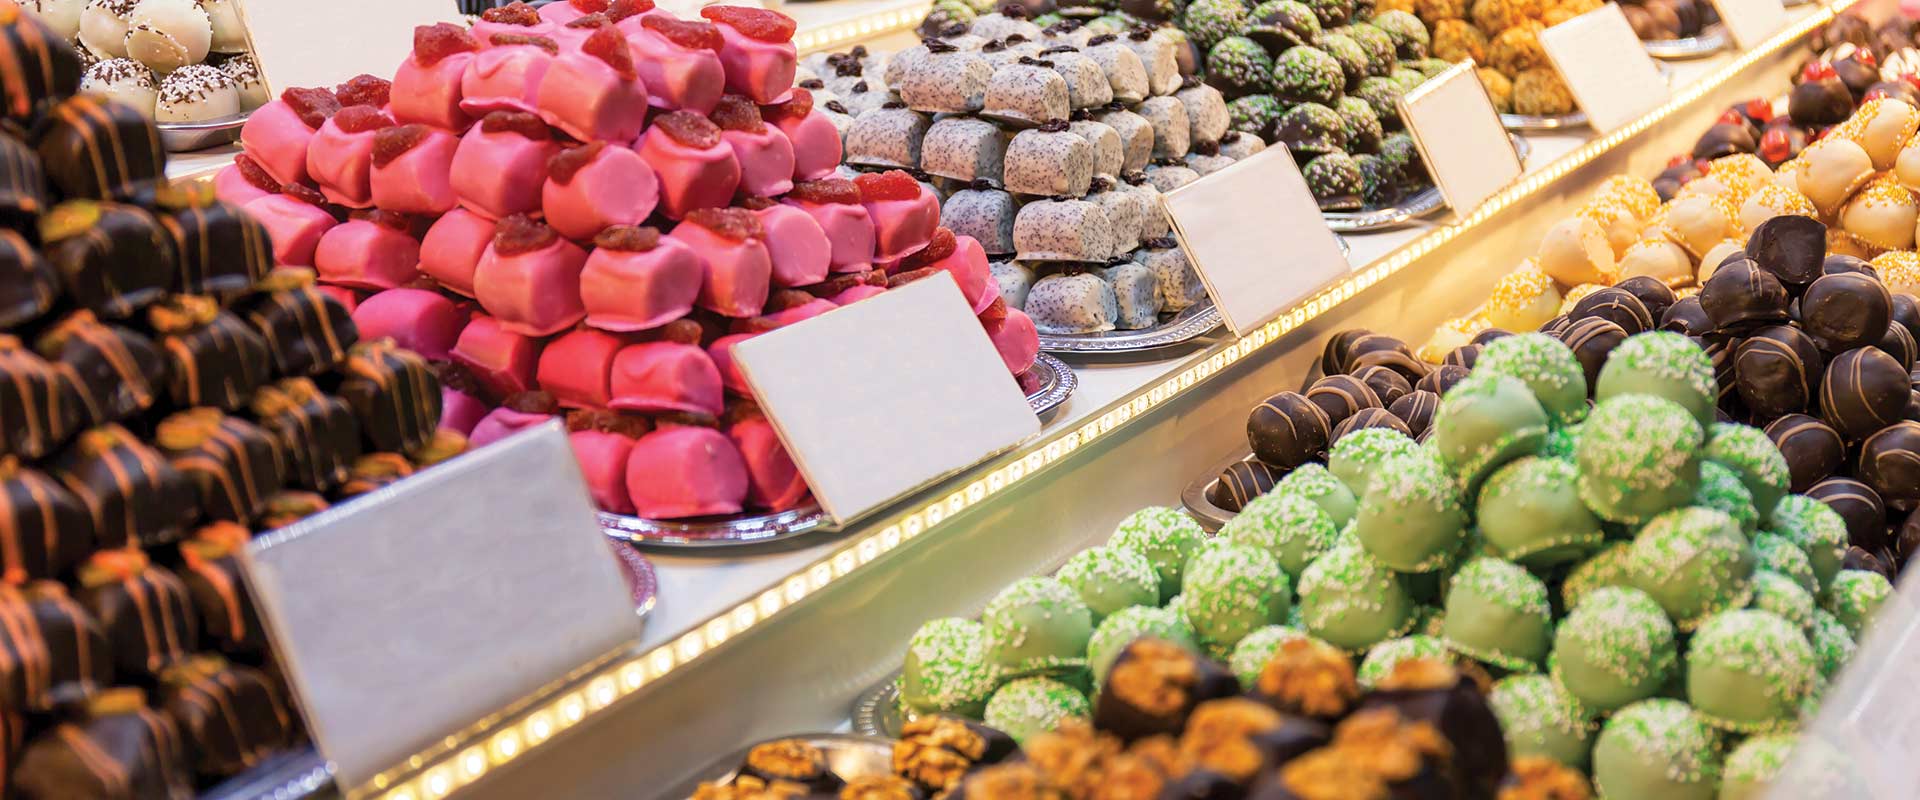 Piles of different coloured sweets in display in a market, Hungary